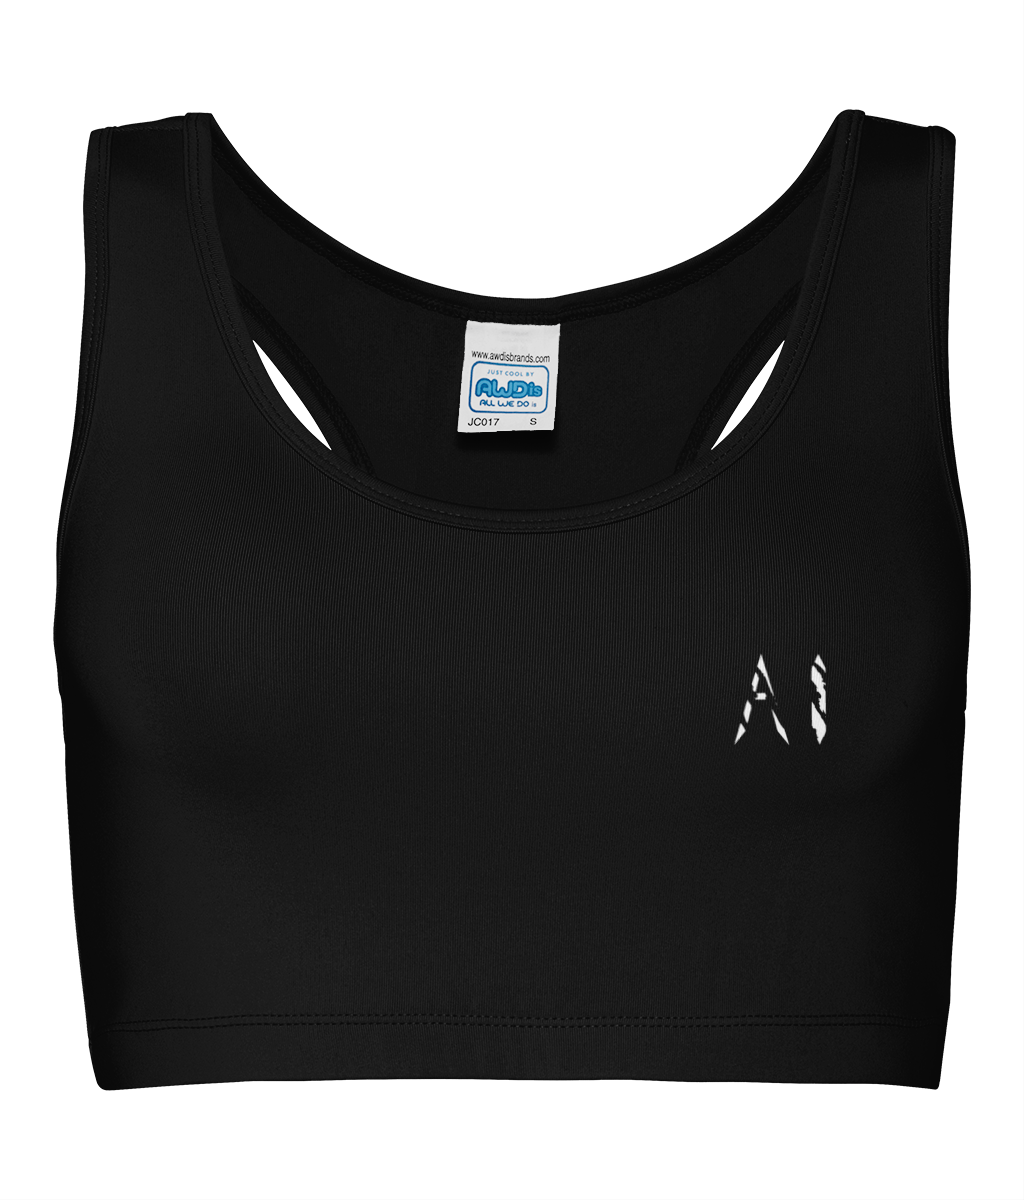 Womens Black Athletic Performance Cropped Top with White logo on left breast